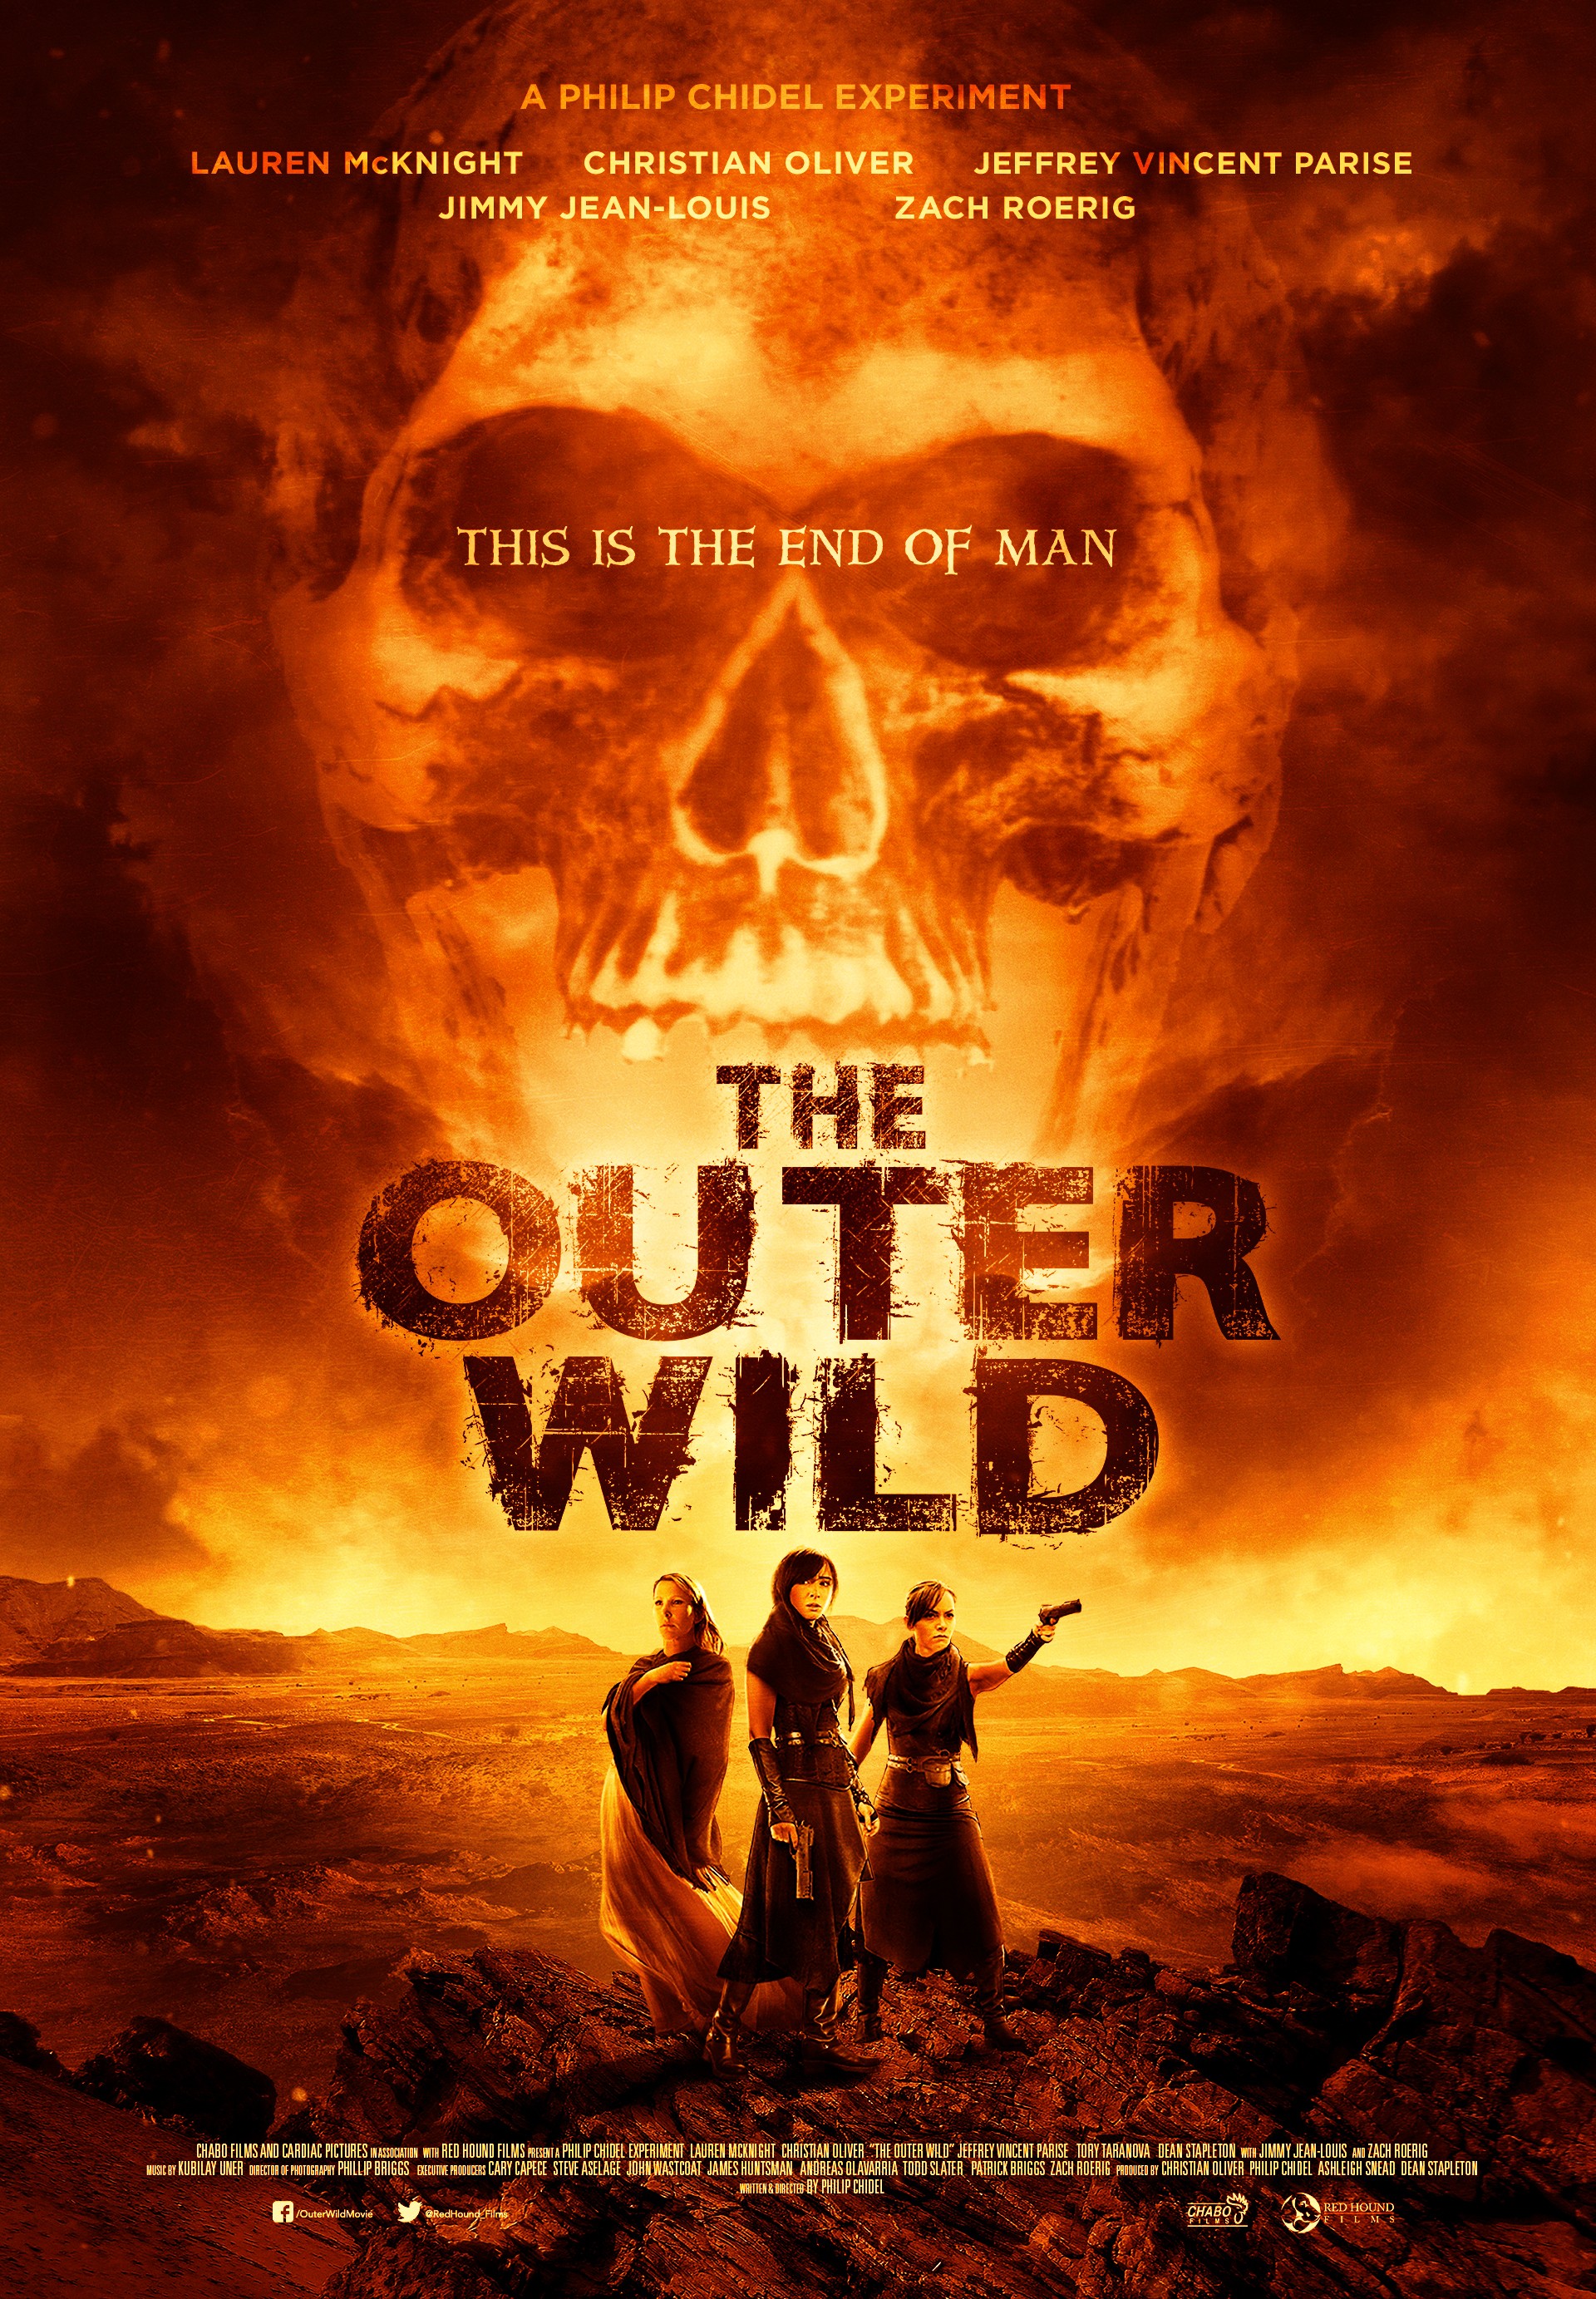 The Outer Wild (2018) - IMDb